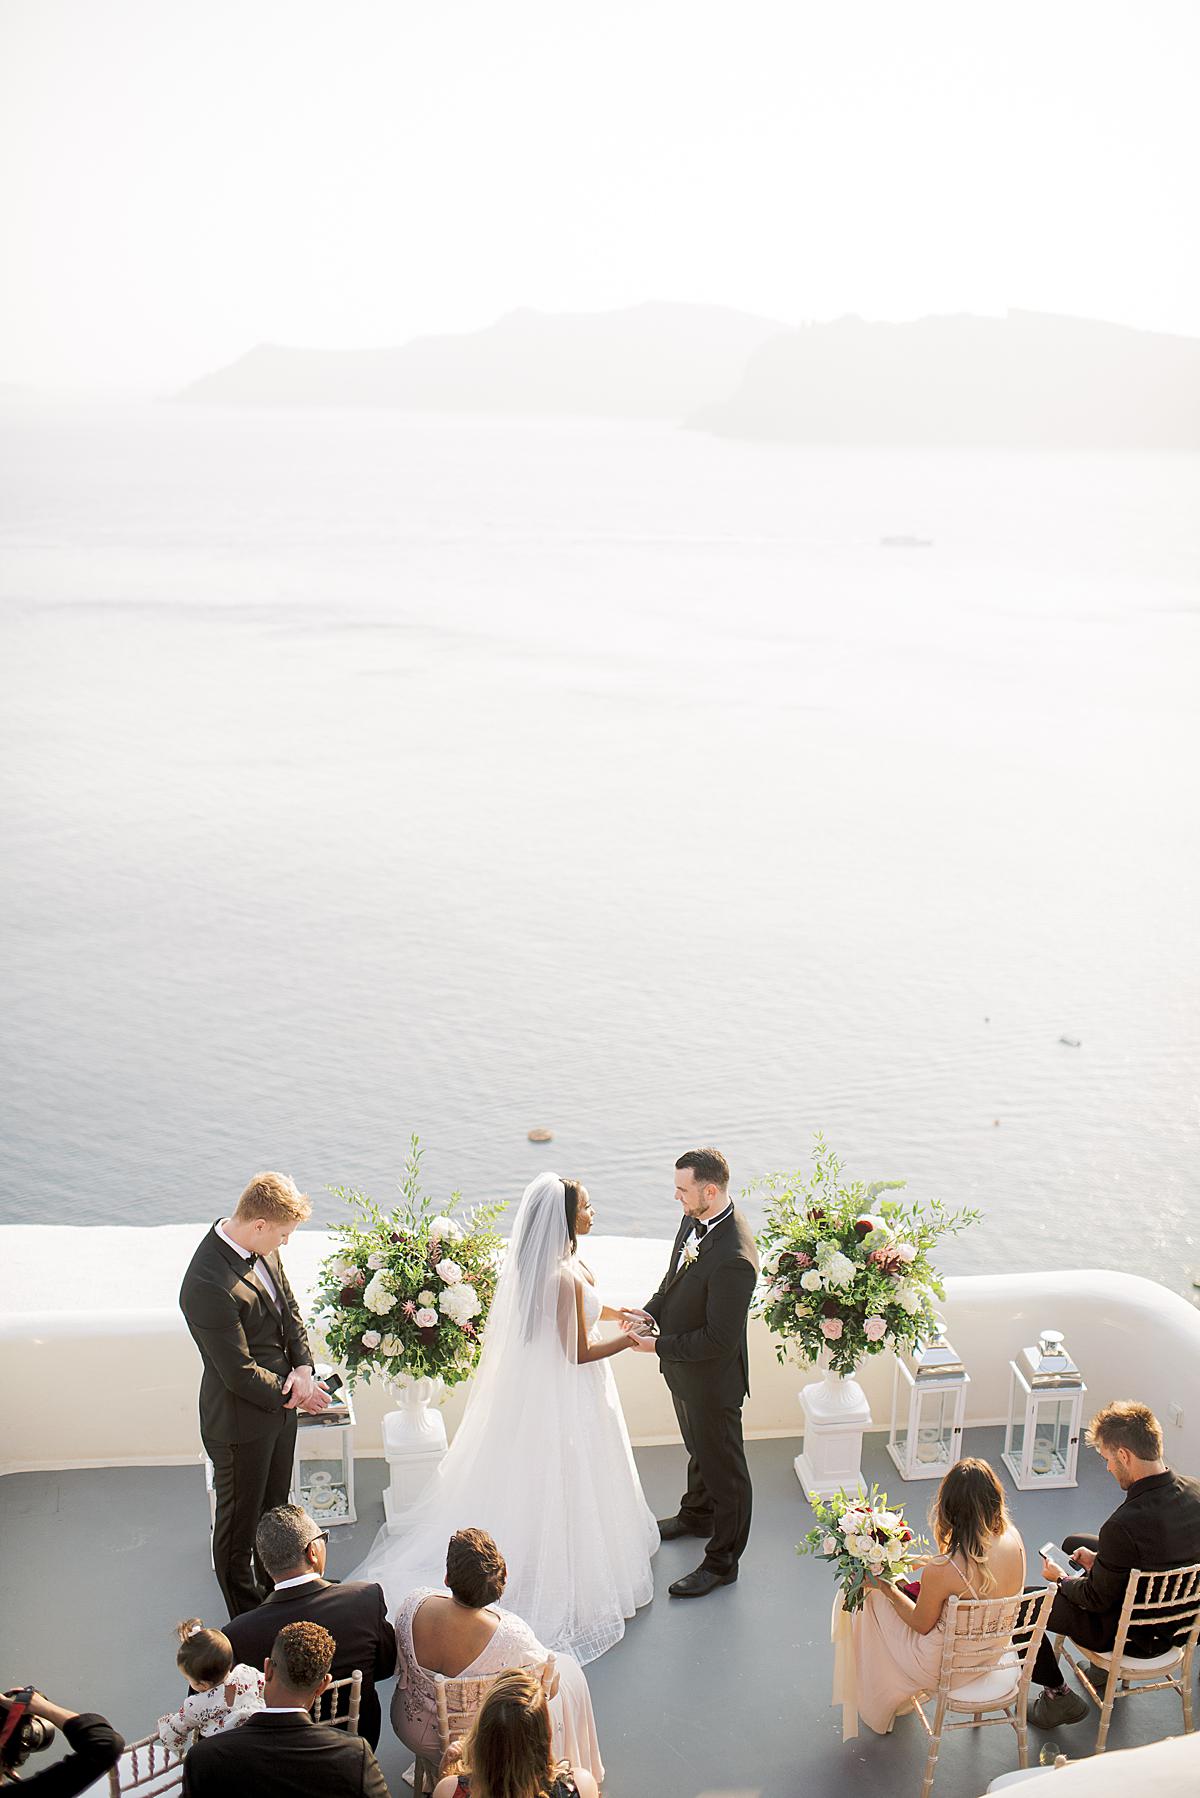 Bride and groom during their ceremony at Canaves Oia Santorini